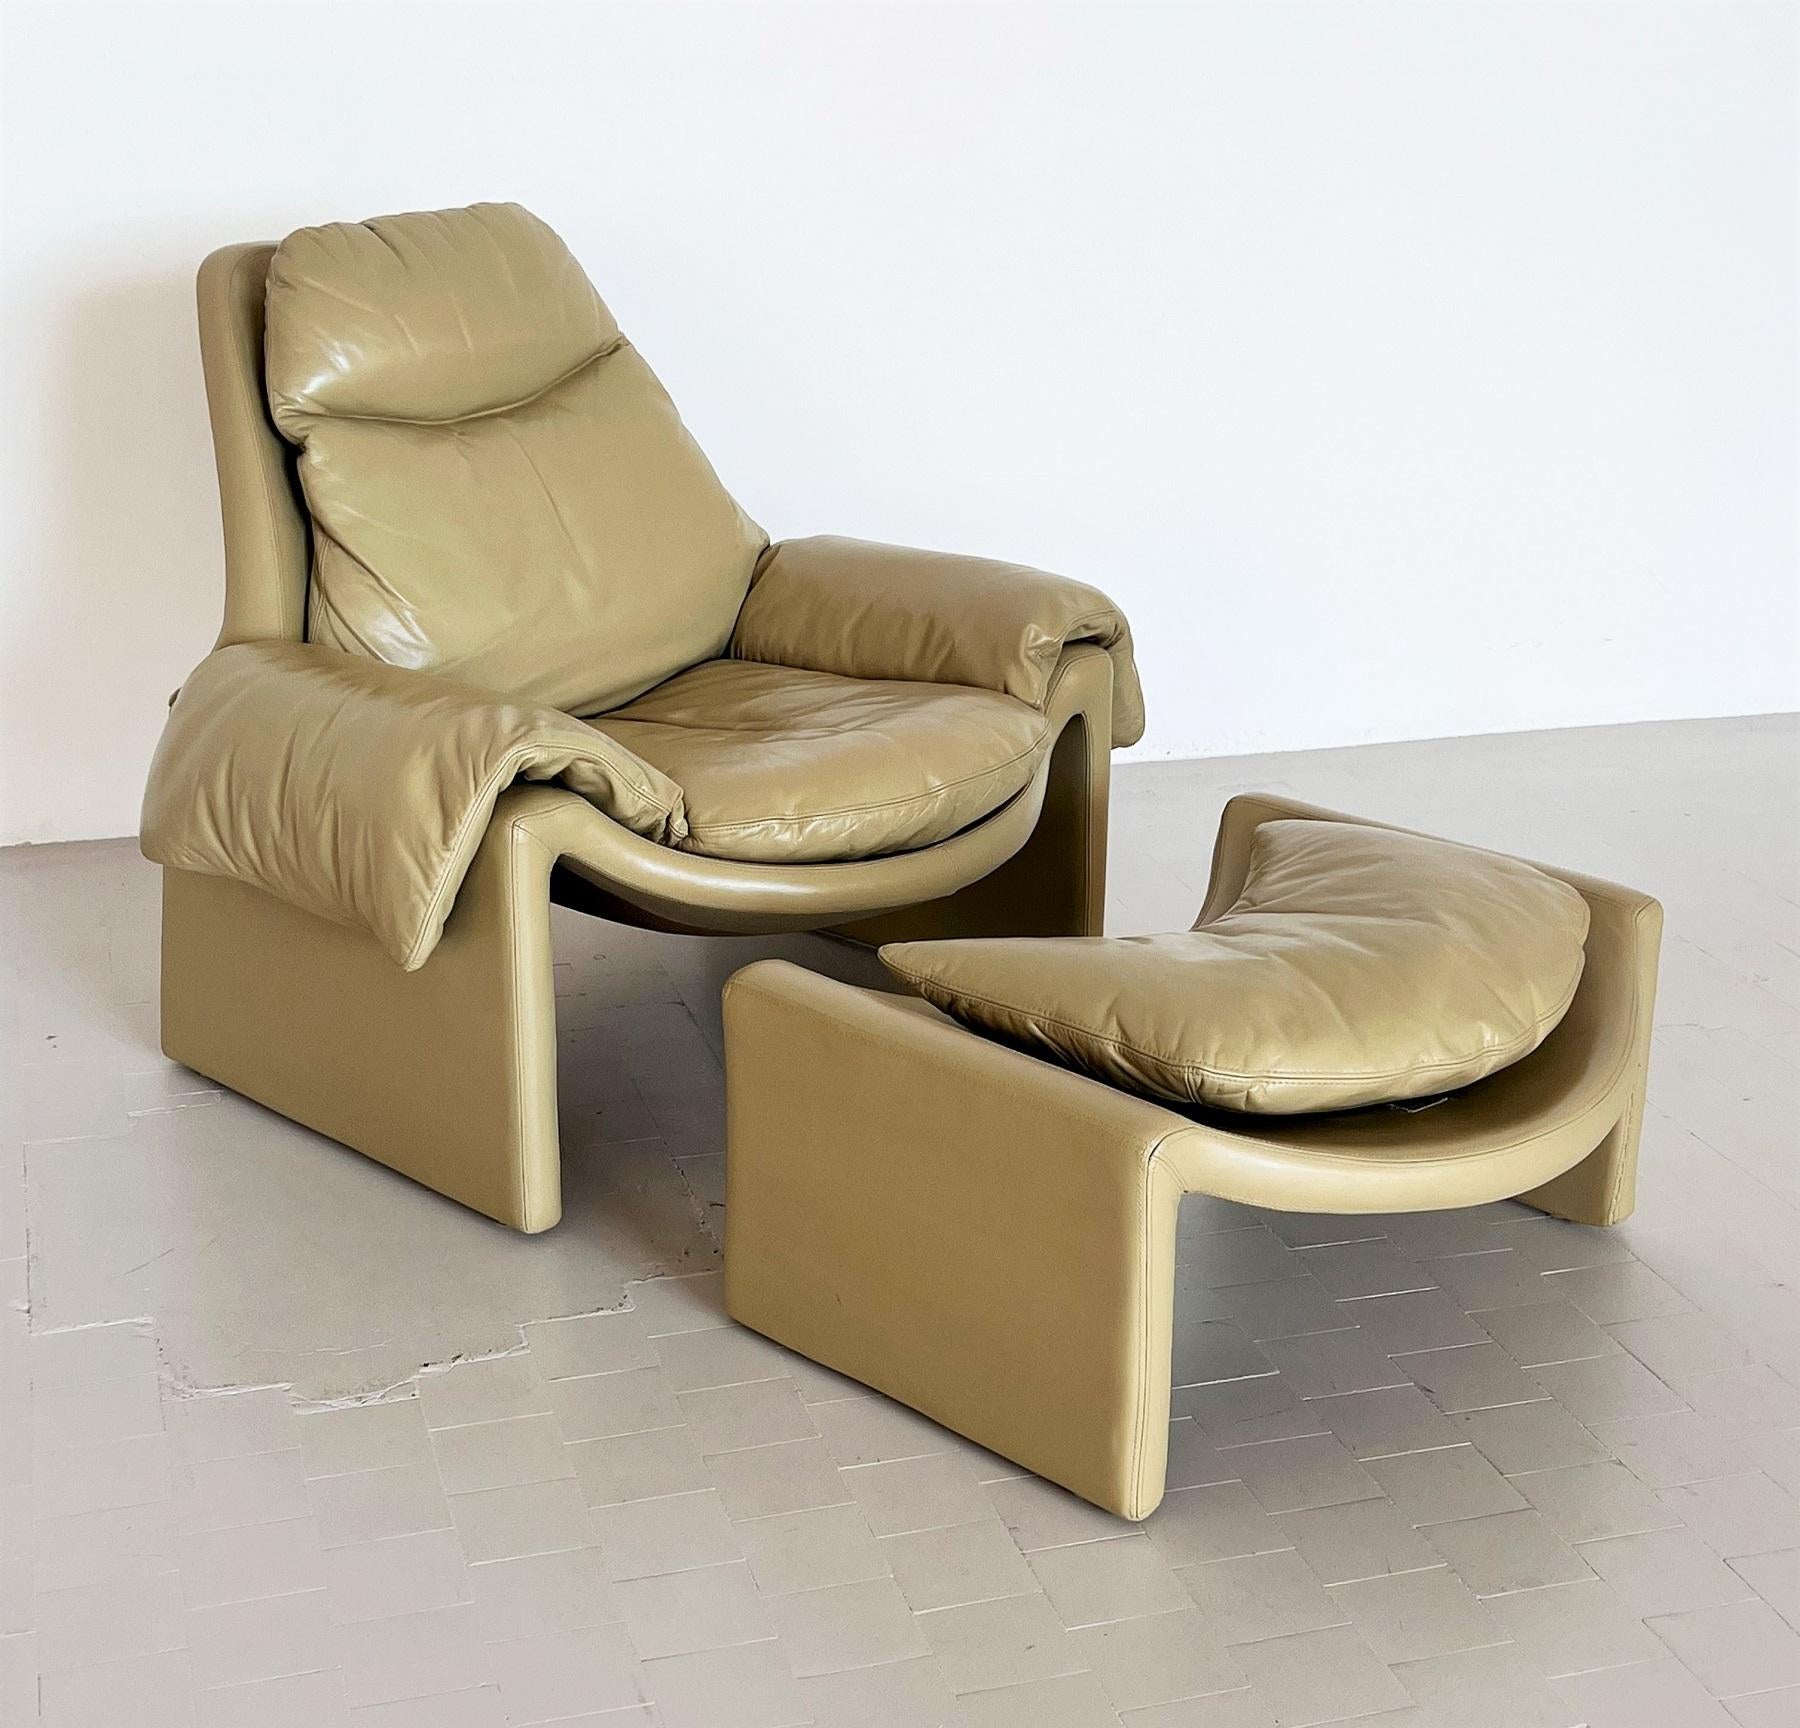 Vittorio Introini P60 Set of Lounge Chair with Ottoman for Saporiti, 1960s For Sale 3